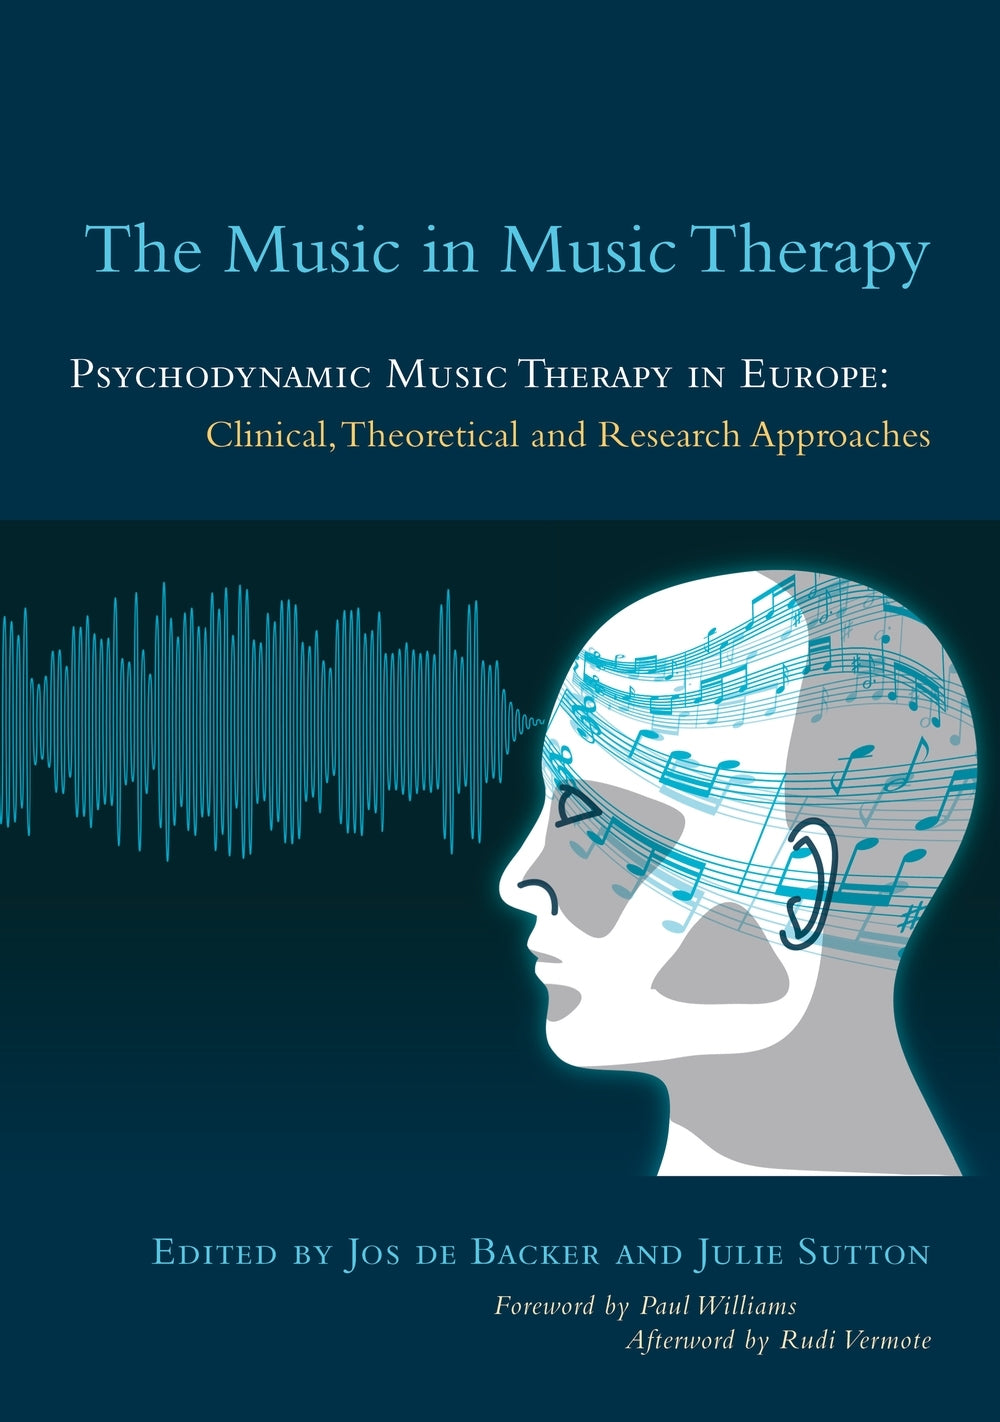 The Music in Music Therapy by Paul Williams, Jos De De Backer, Rudi Vermote, Julie Sutton, No Author Listed